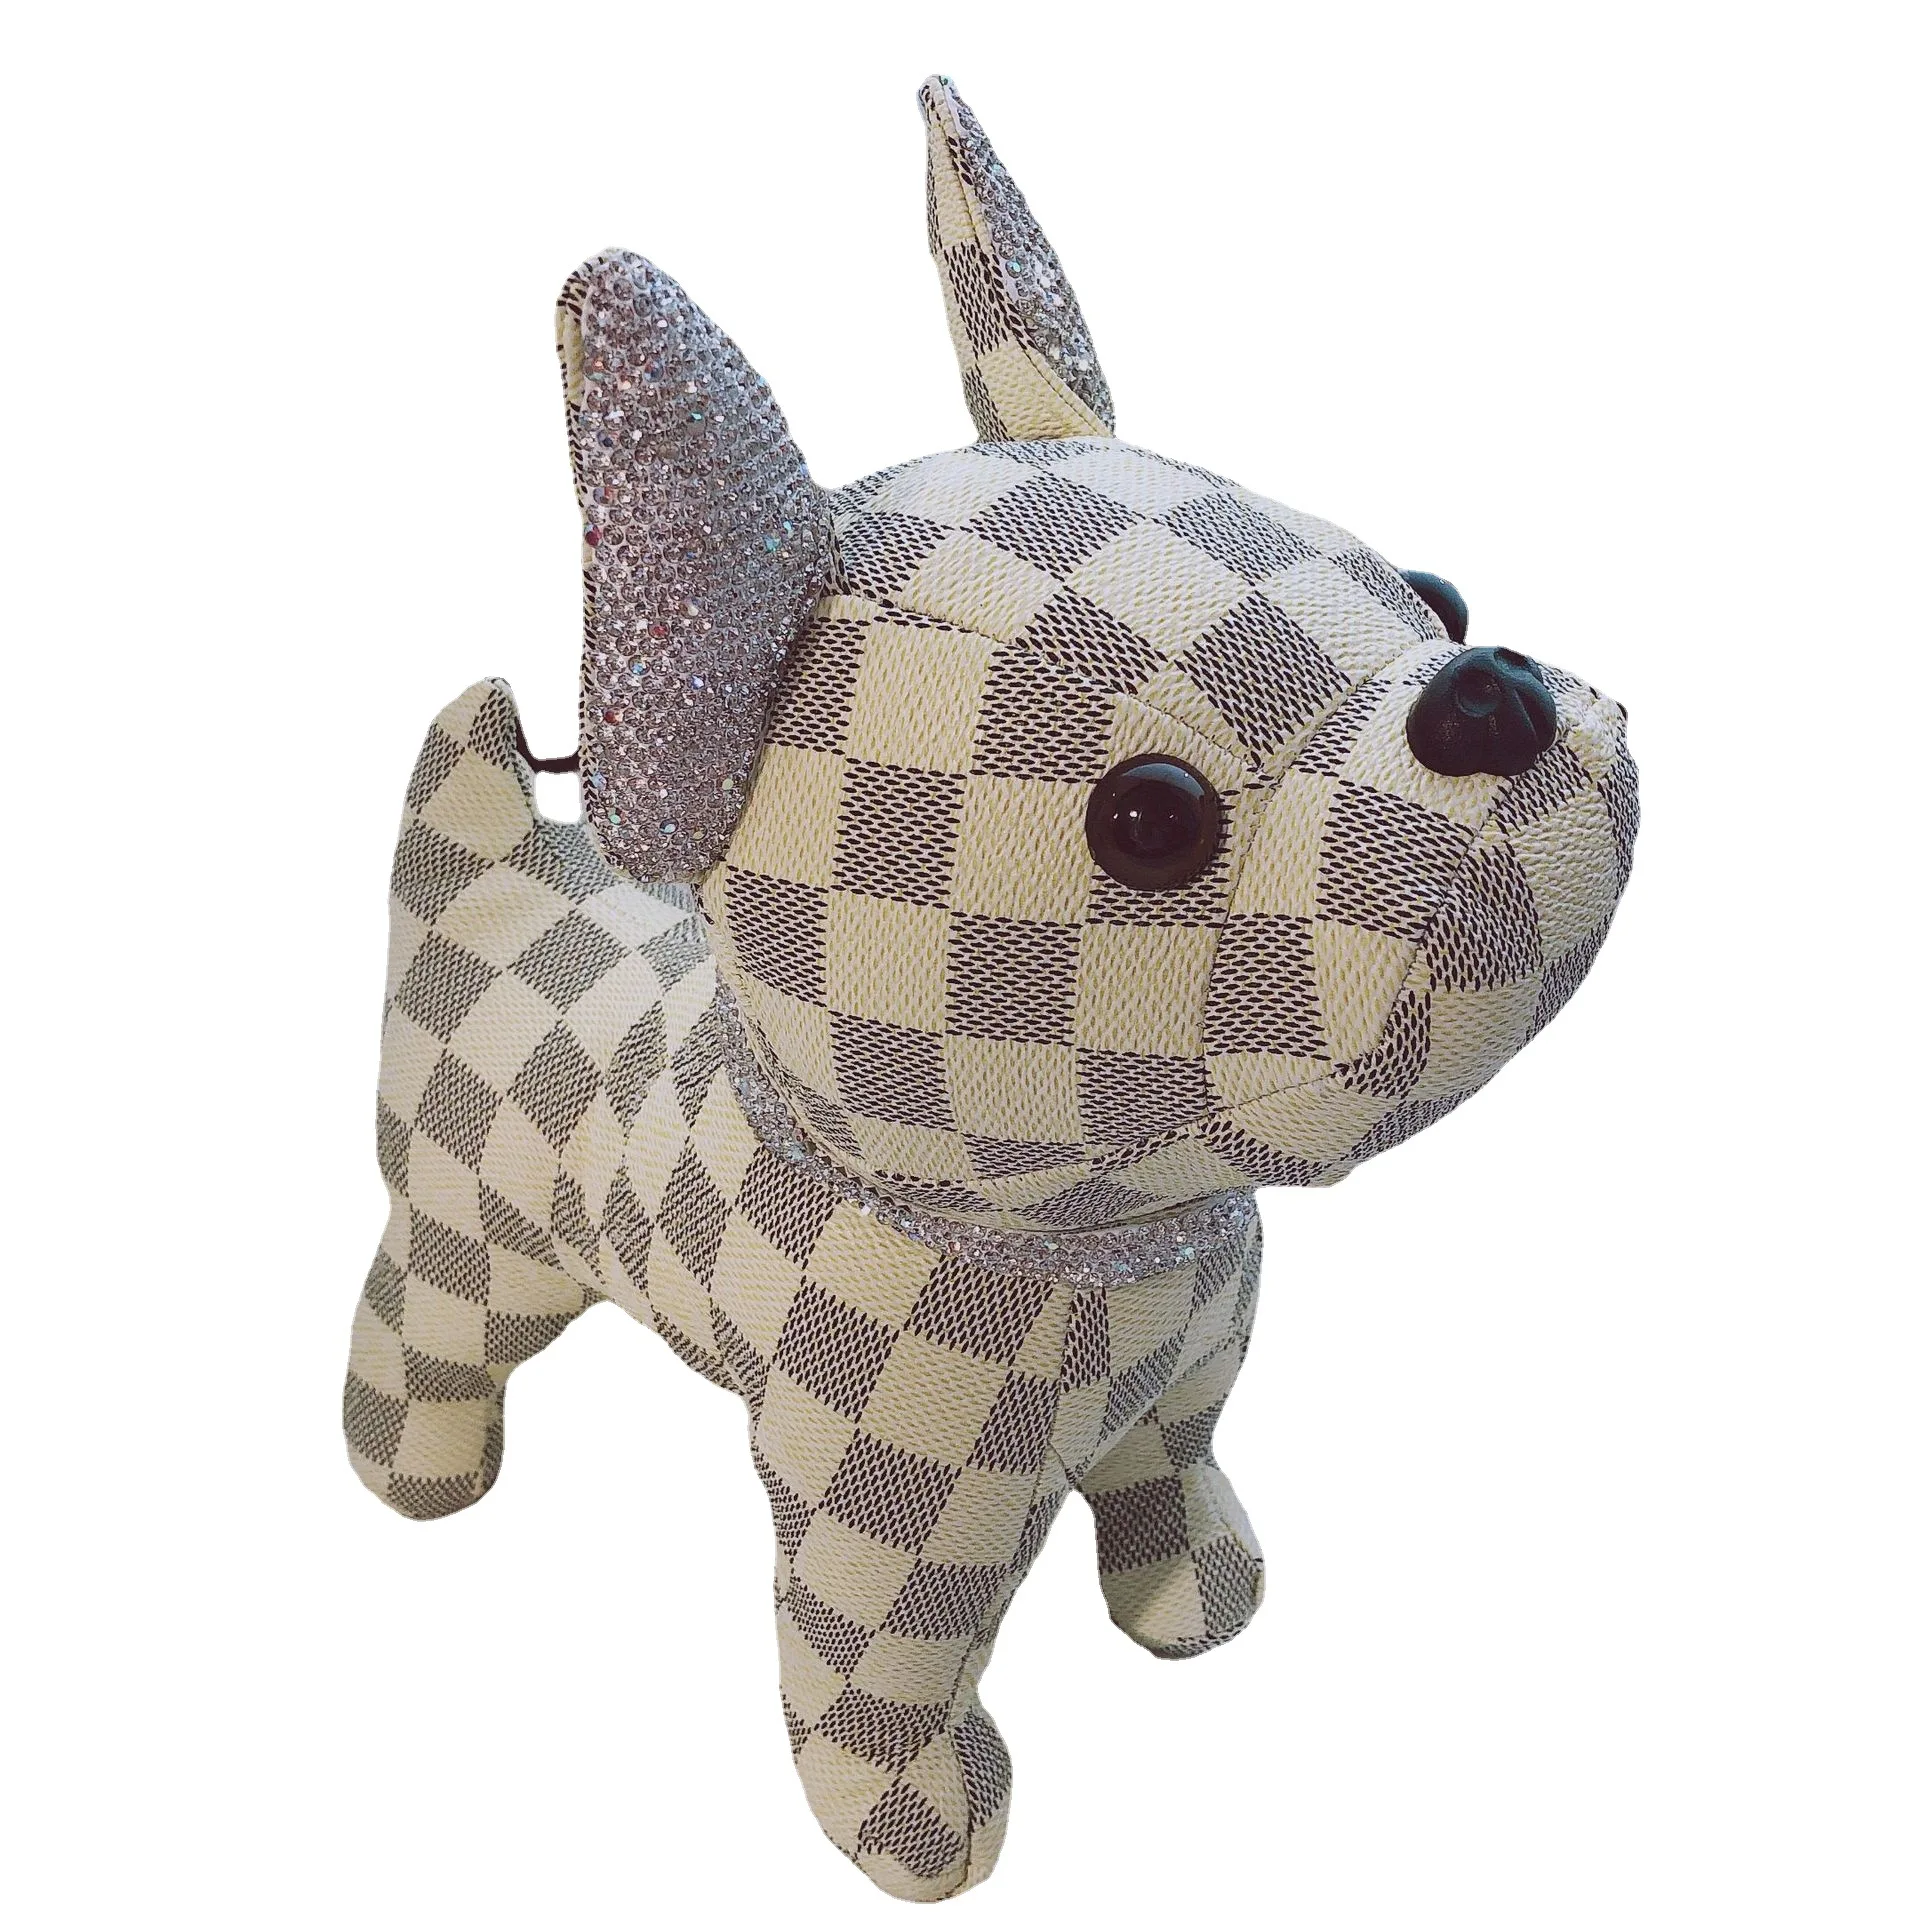 Source New Design Checkerboard Leather Small Size Stuffed Plush Dog Toy on  m.